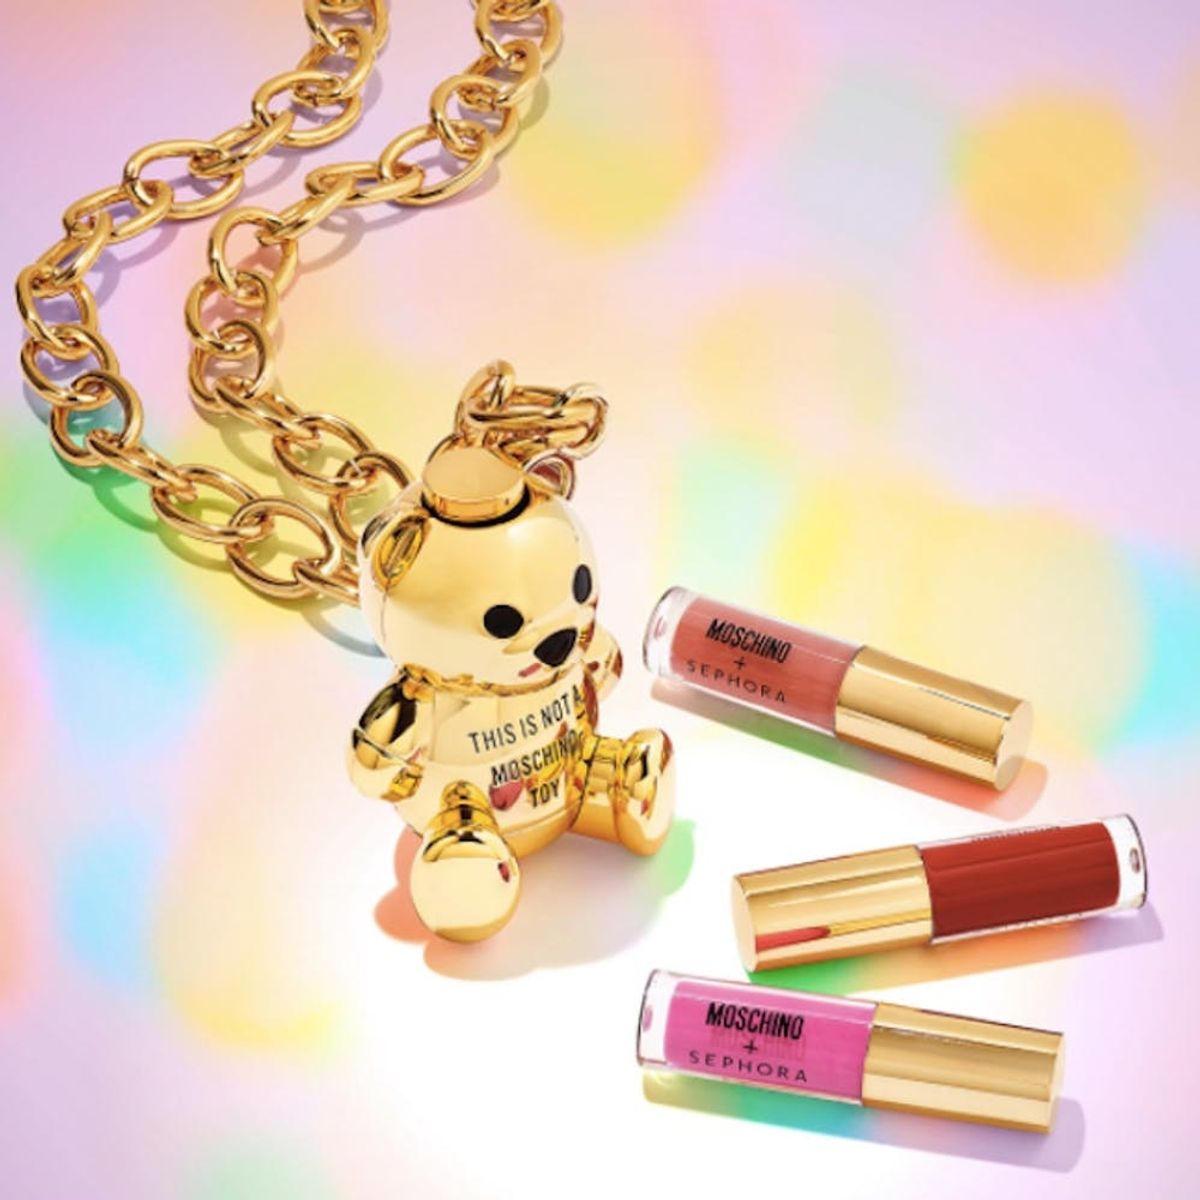 Moschino Is Launching Its First-Ever Makeup Line at Sephora and It’s the Absolute Cutest